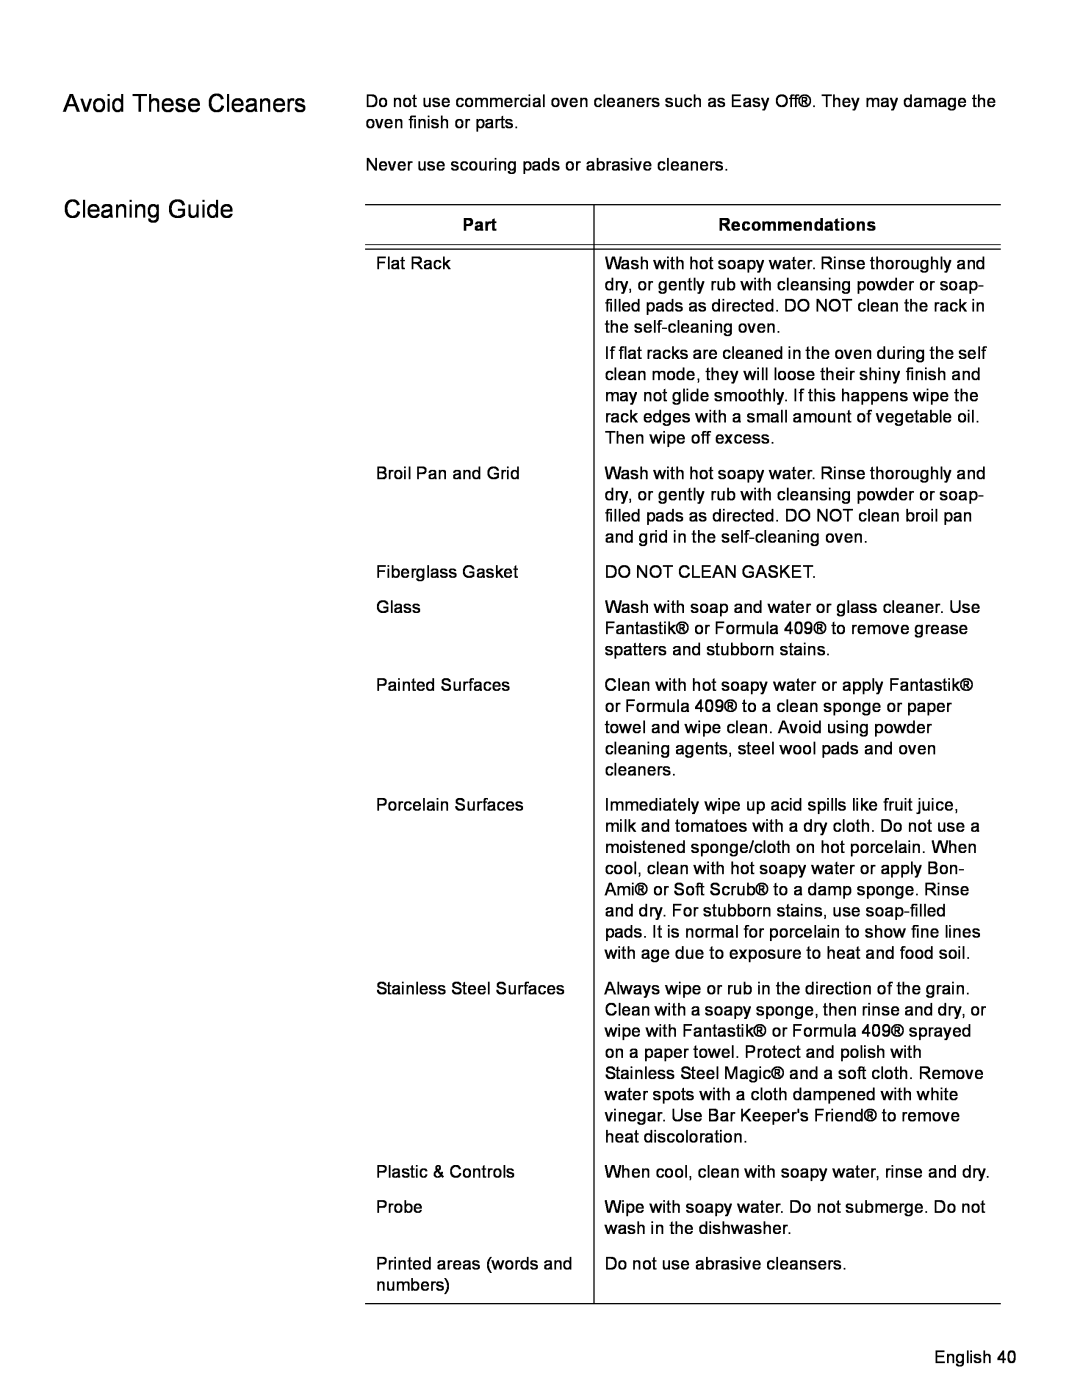 Bosch Appliances HBN54, HBL57, HBL56, HBN56 manual Avoid These Cleaners Cleaning Guide, Part, Recommendations 